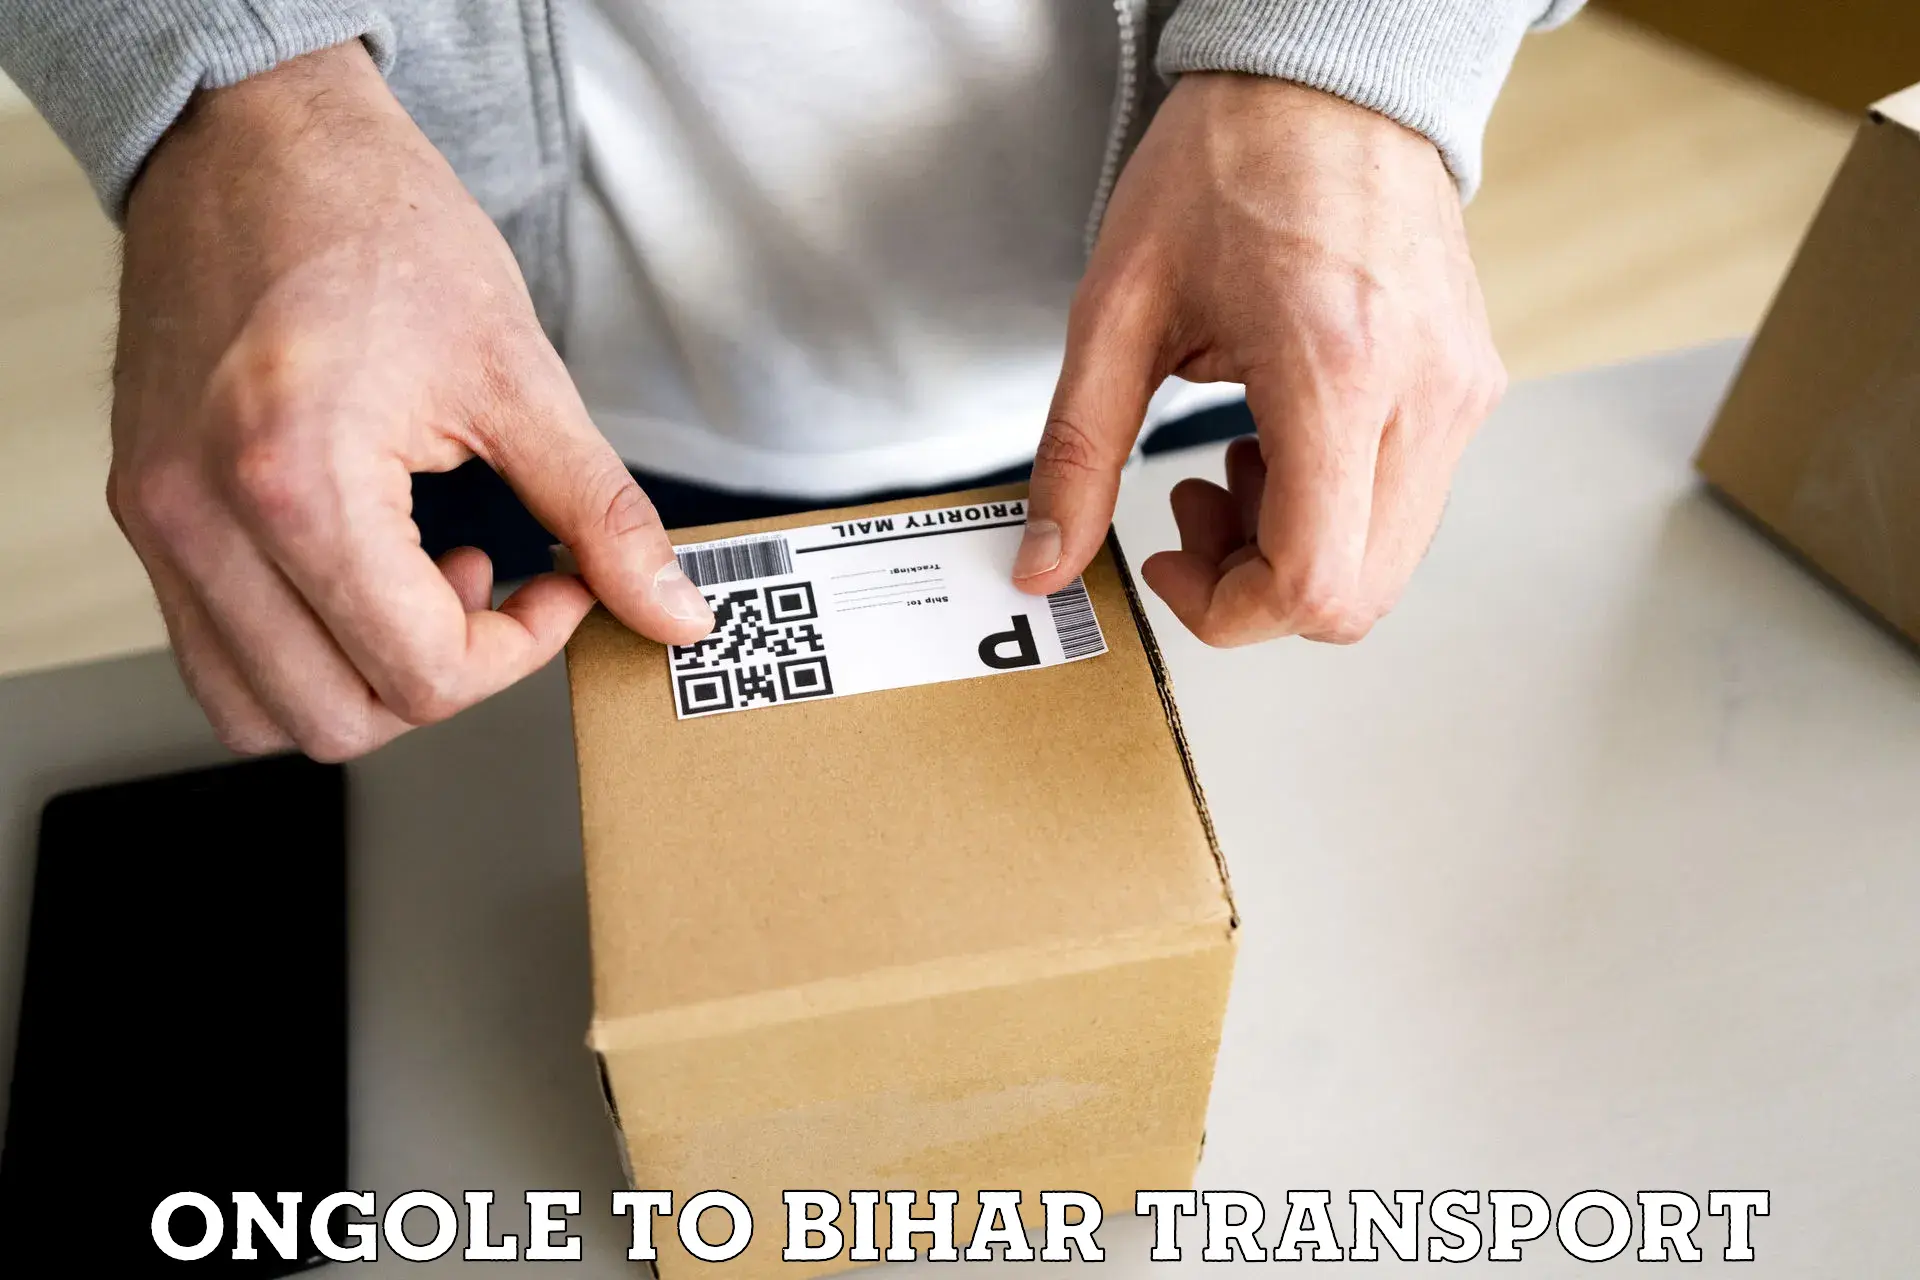 Daily transport service Ongole to Biraul